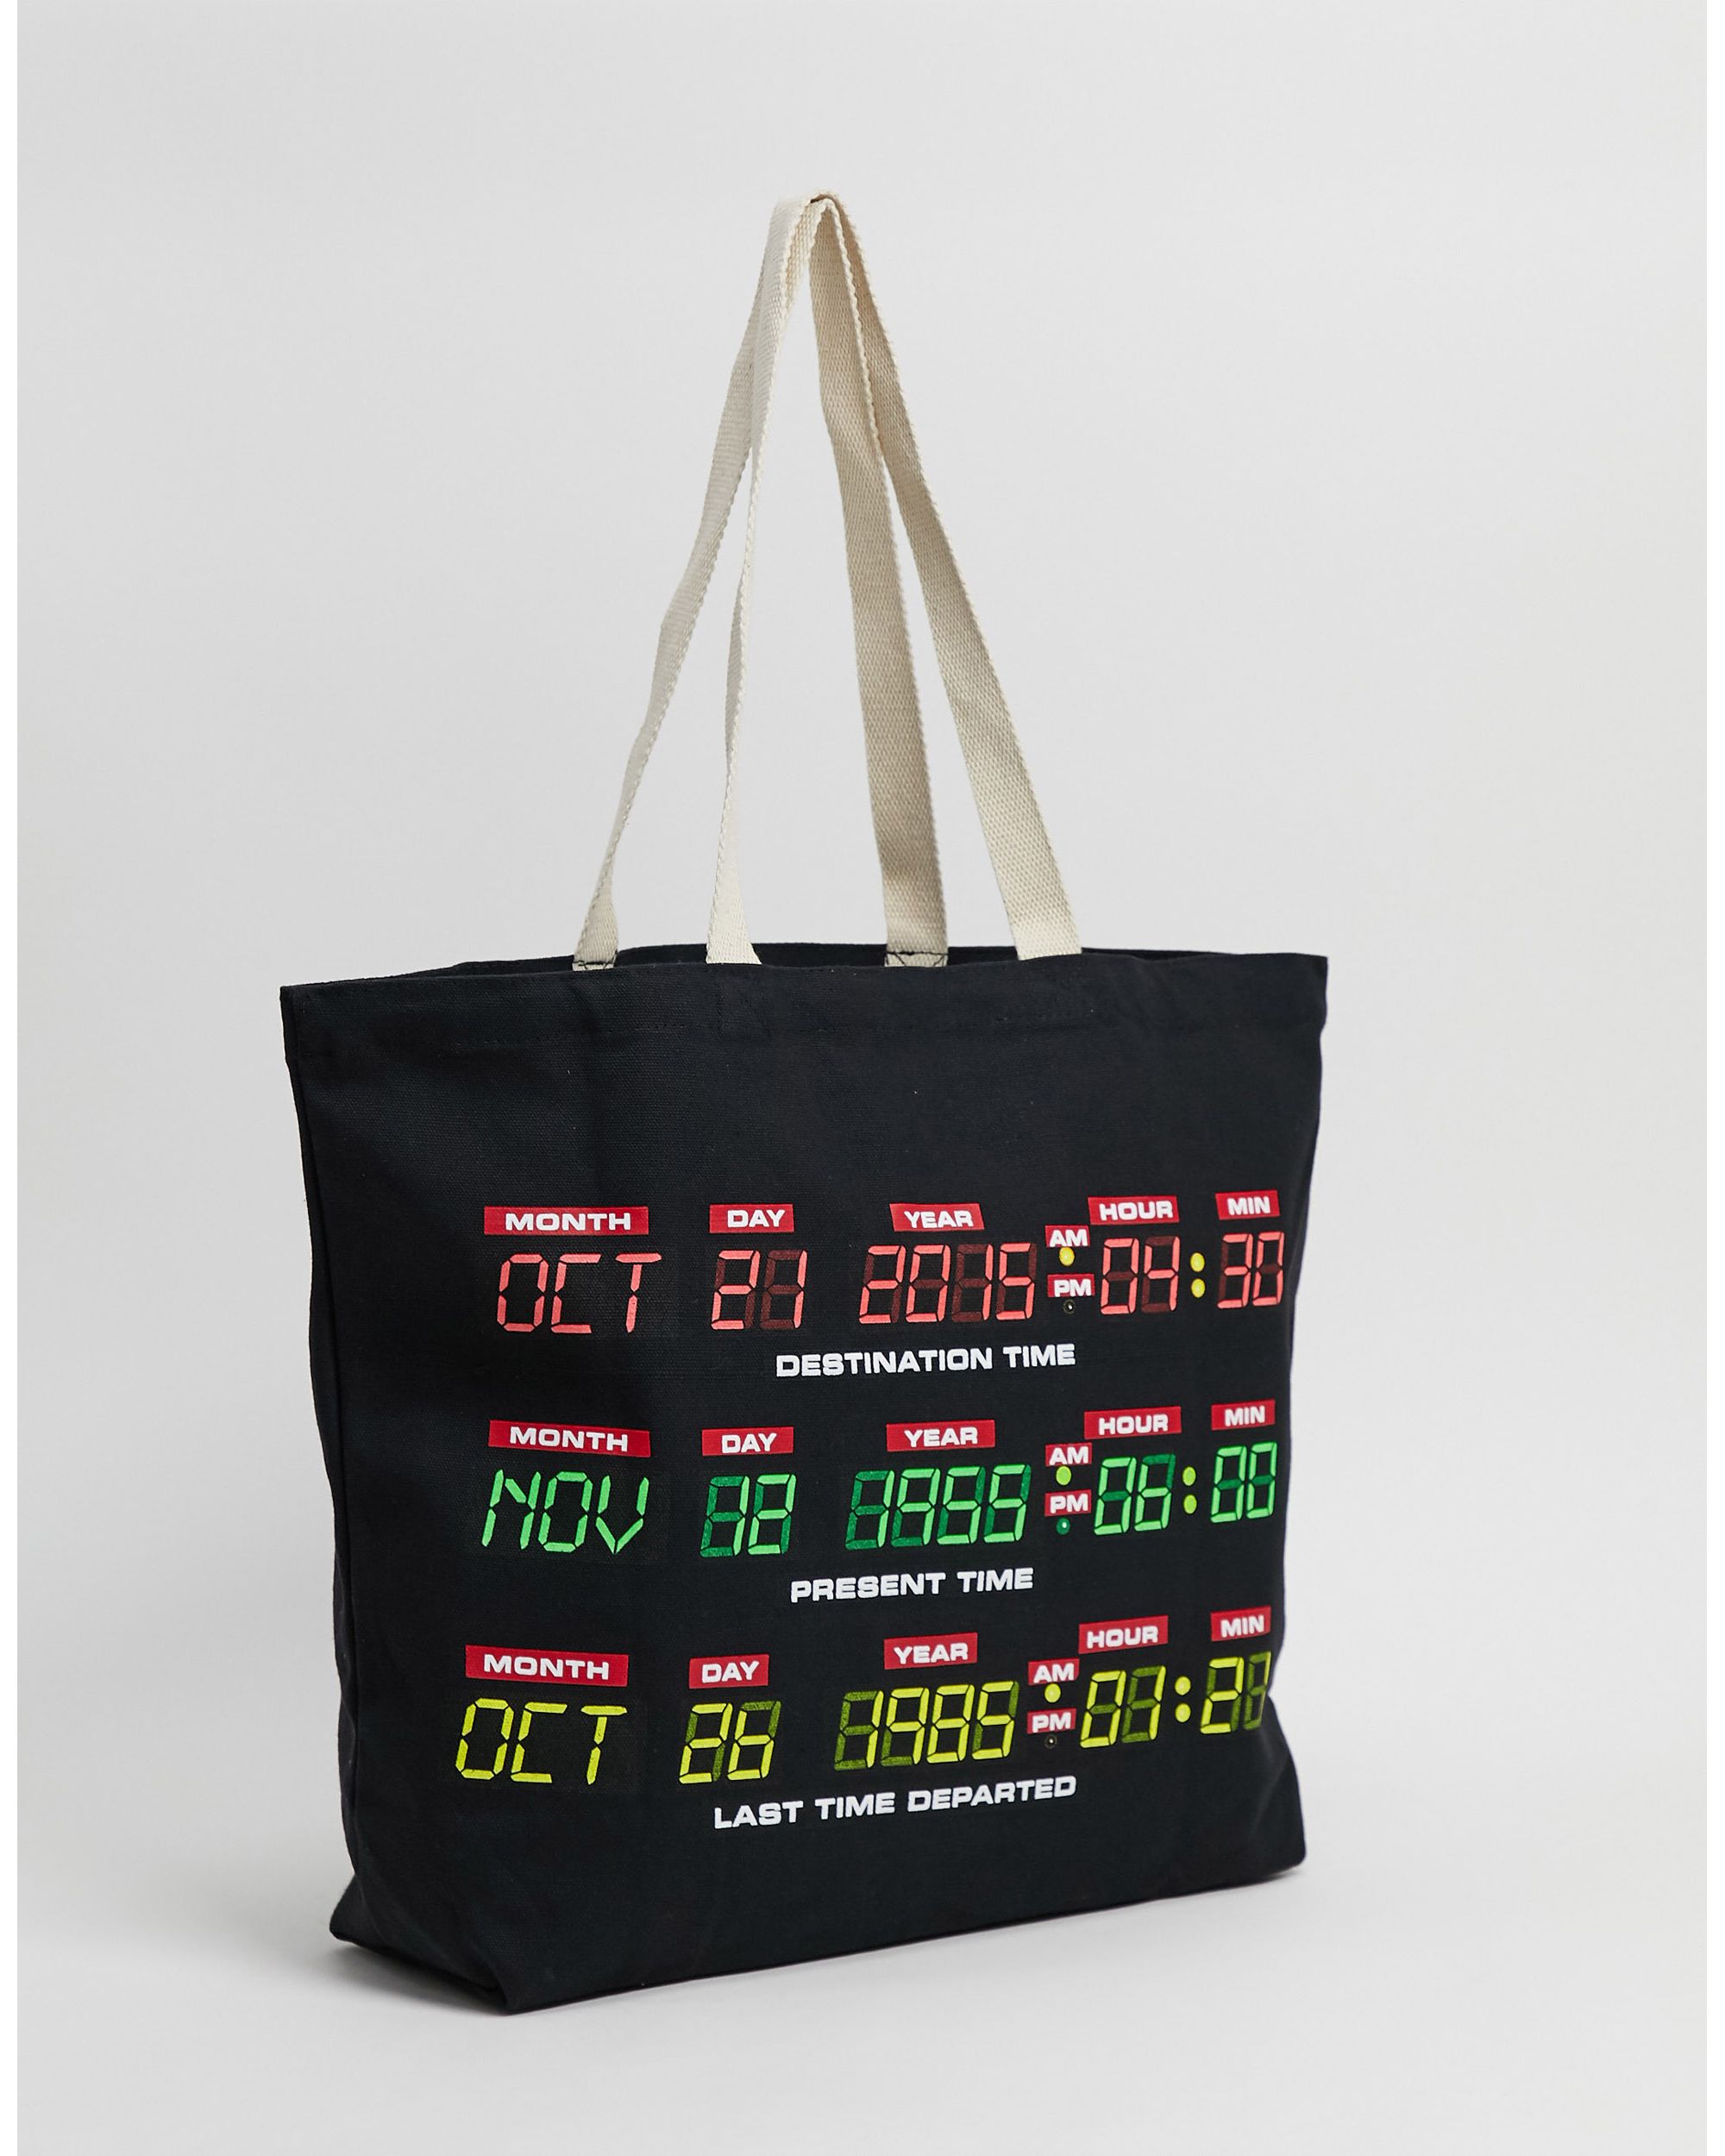 The Hundreds x Back To The Future time travel tote bag